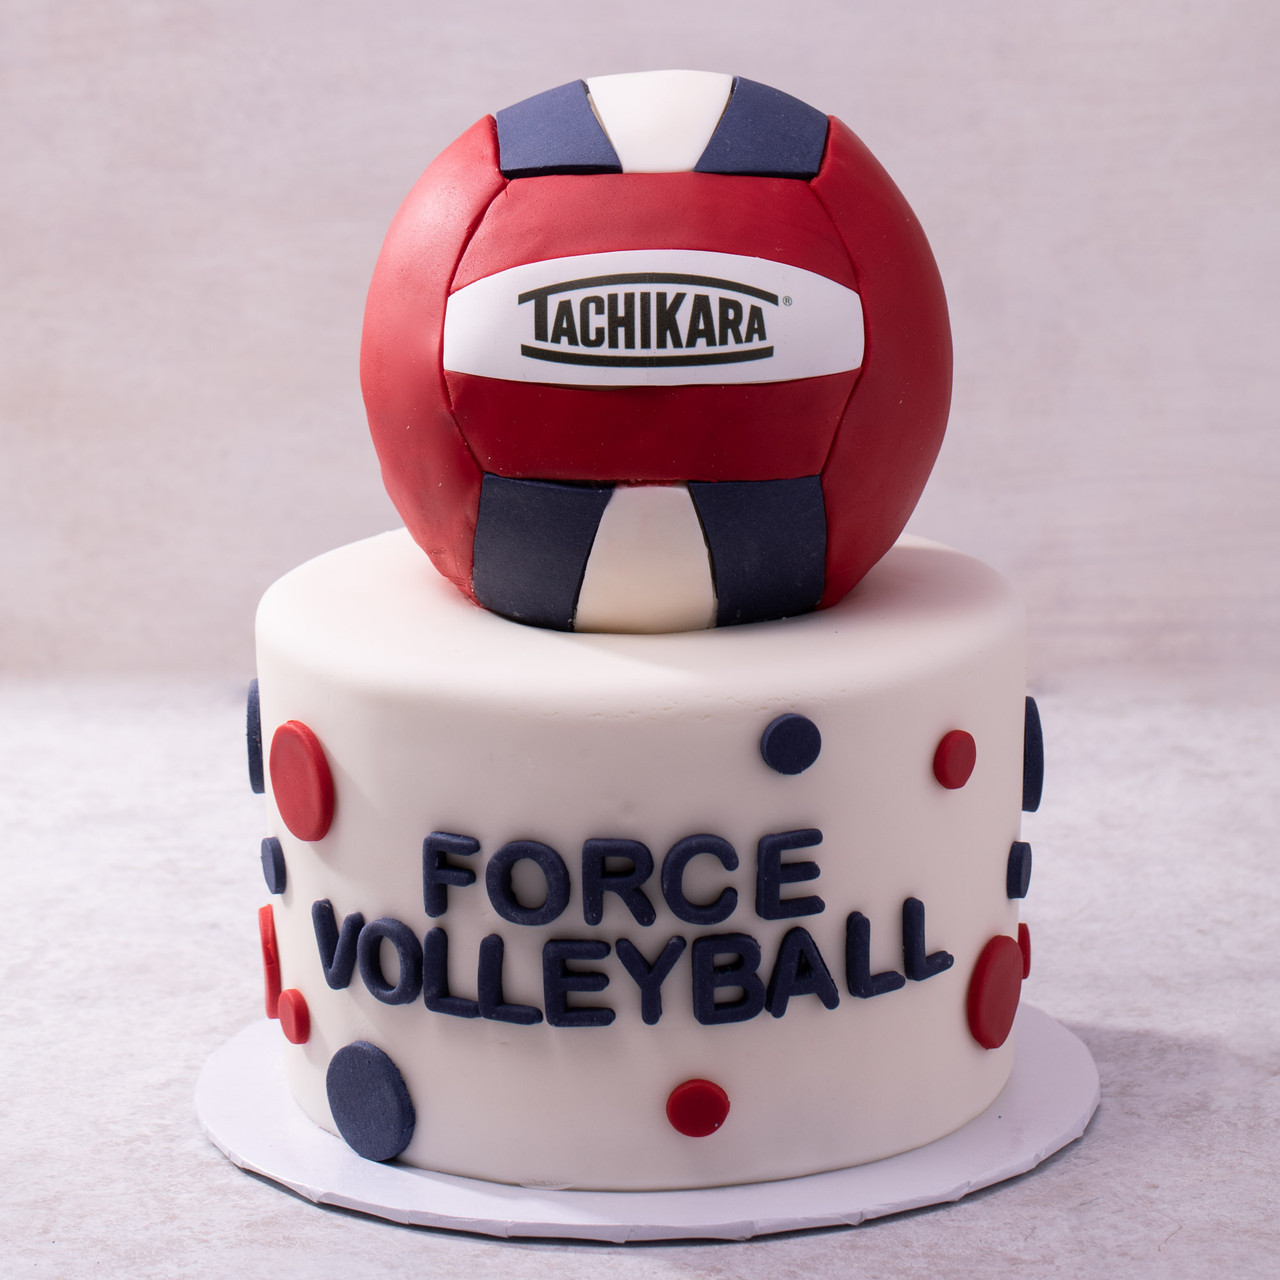 Send Football Volleyball Mixed Cakes Online - GAL21-96139 | Giftalove